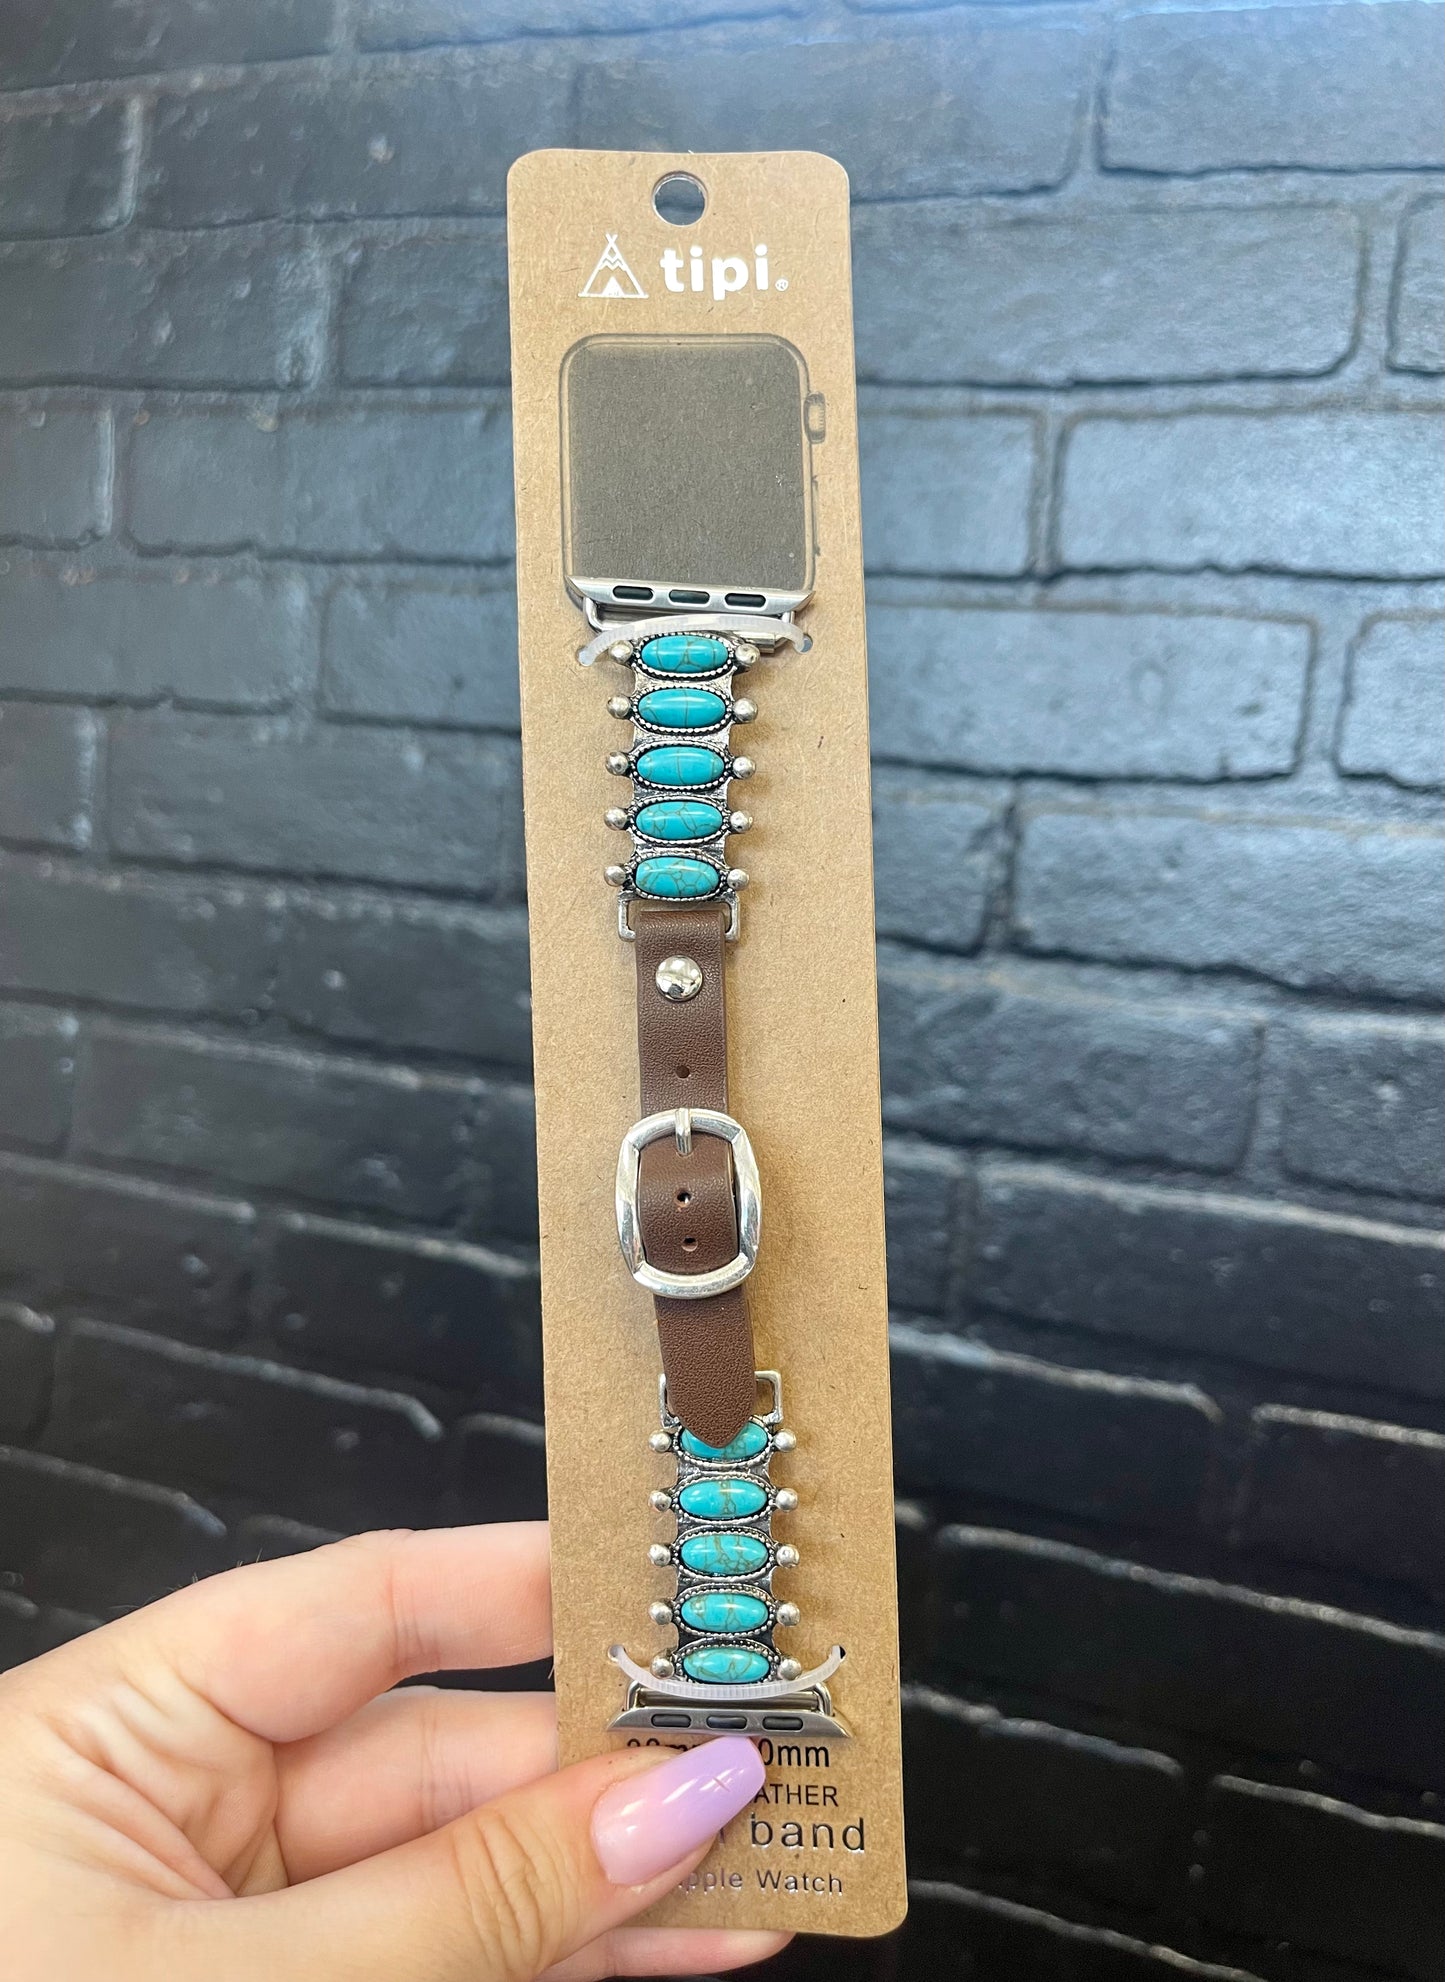 The Jinks Watch Band